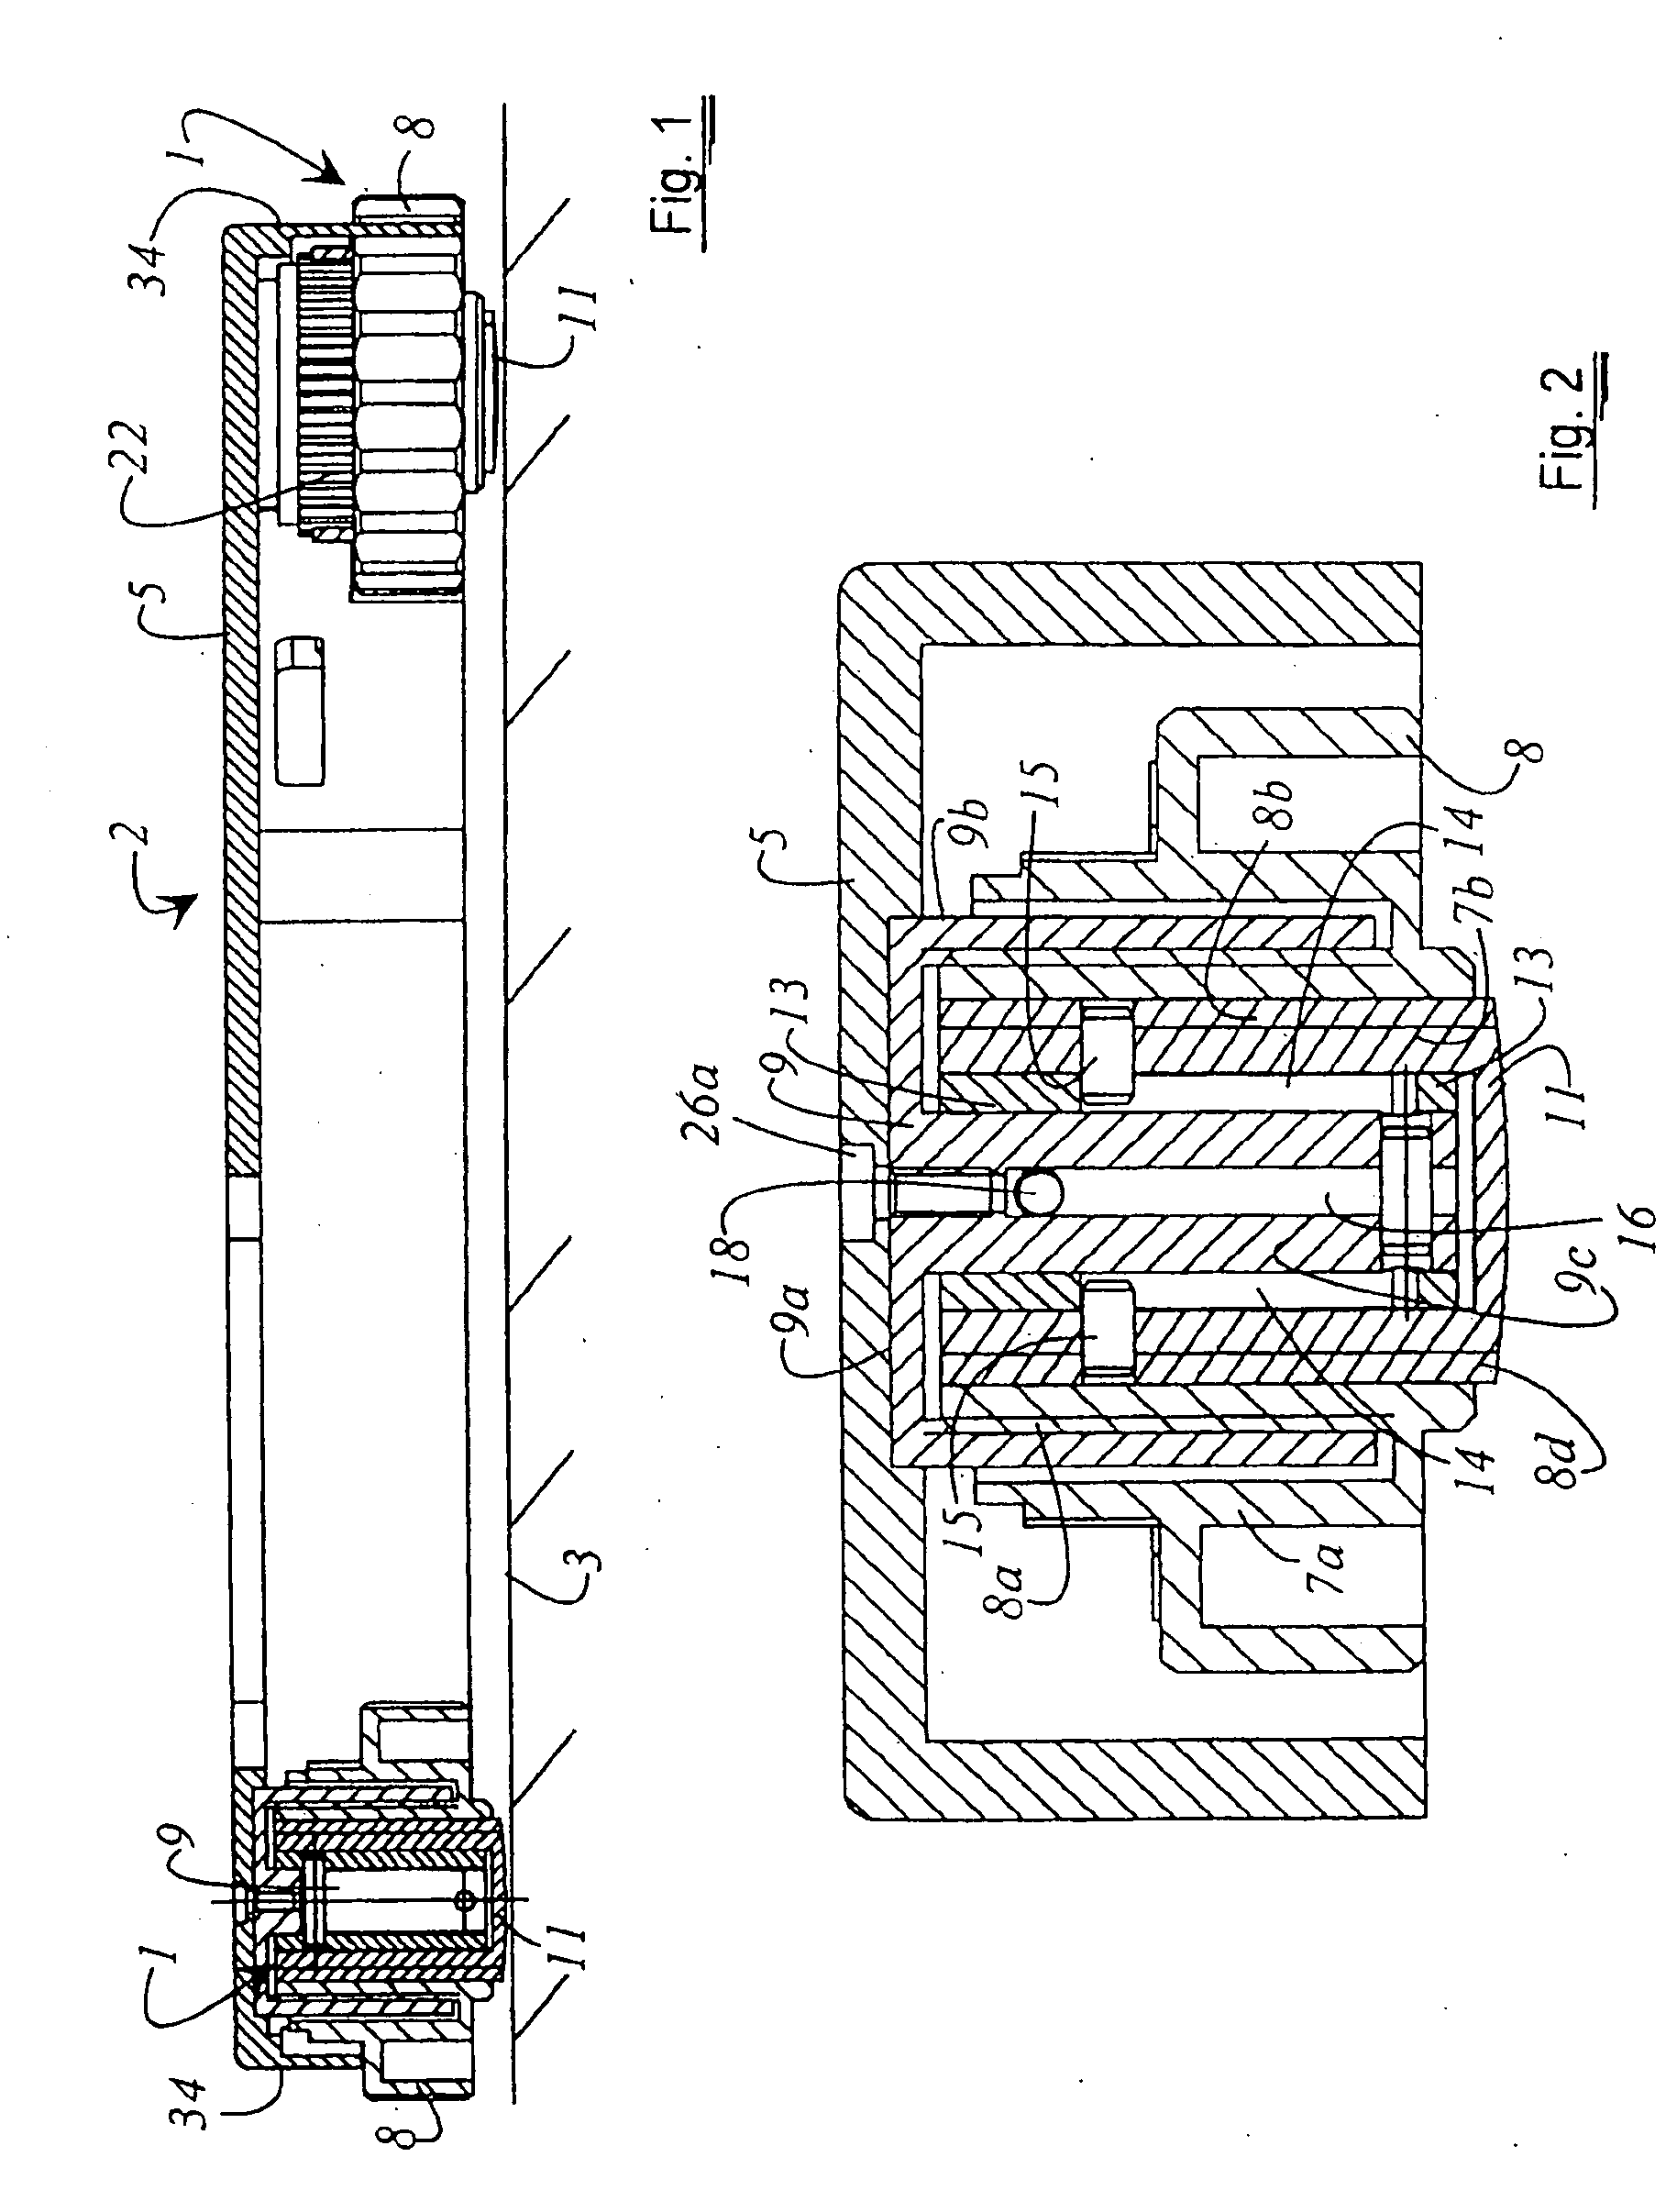 Height-adjusting device and support for optical systems, which comprises height-adjusting devices